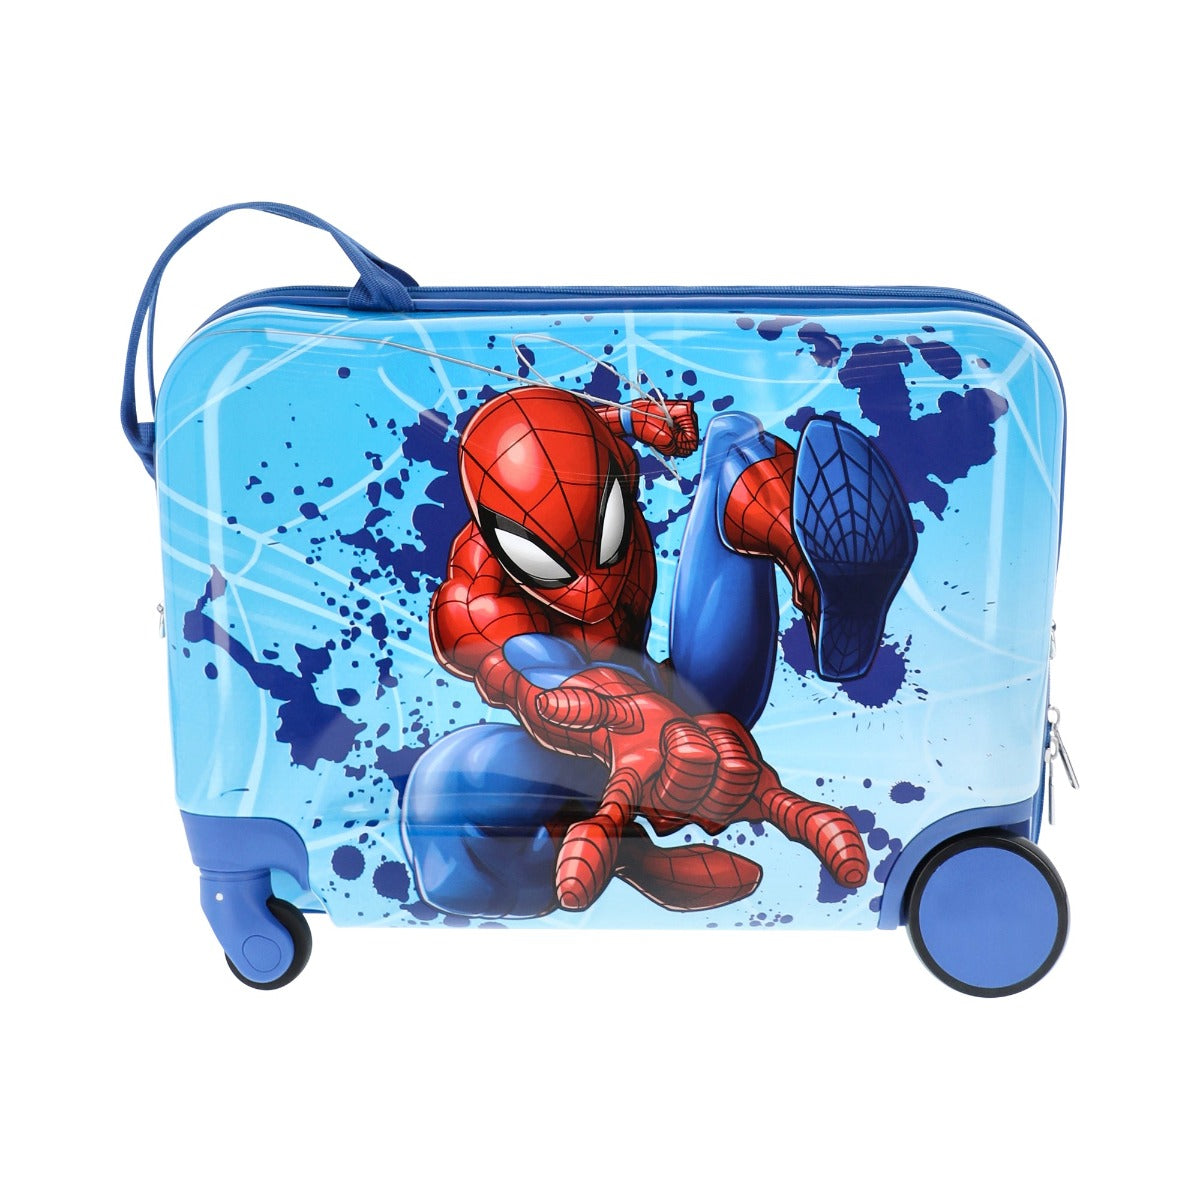 Ful Marvel Spiderman 14.5 inch ride-along carry-on rolling luggage for kids